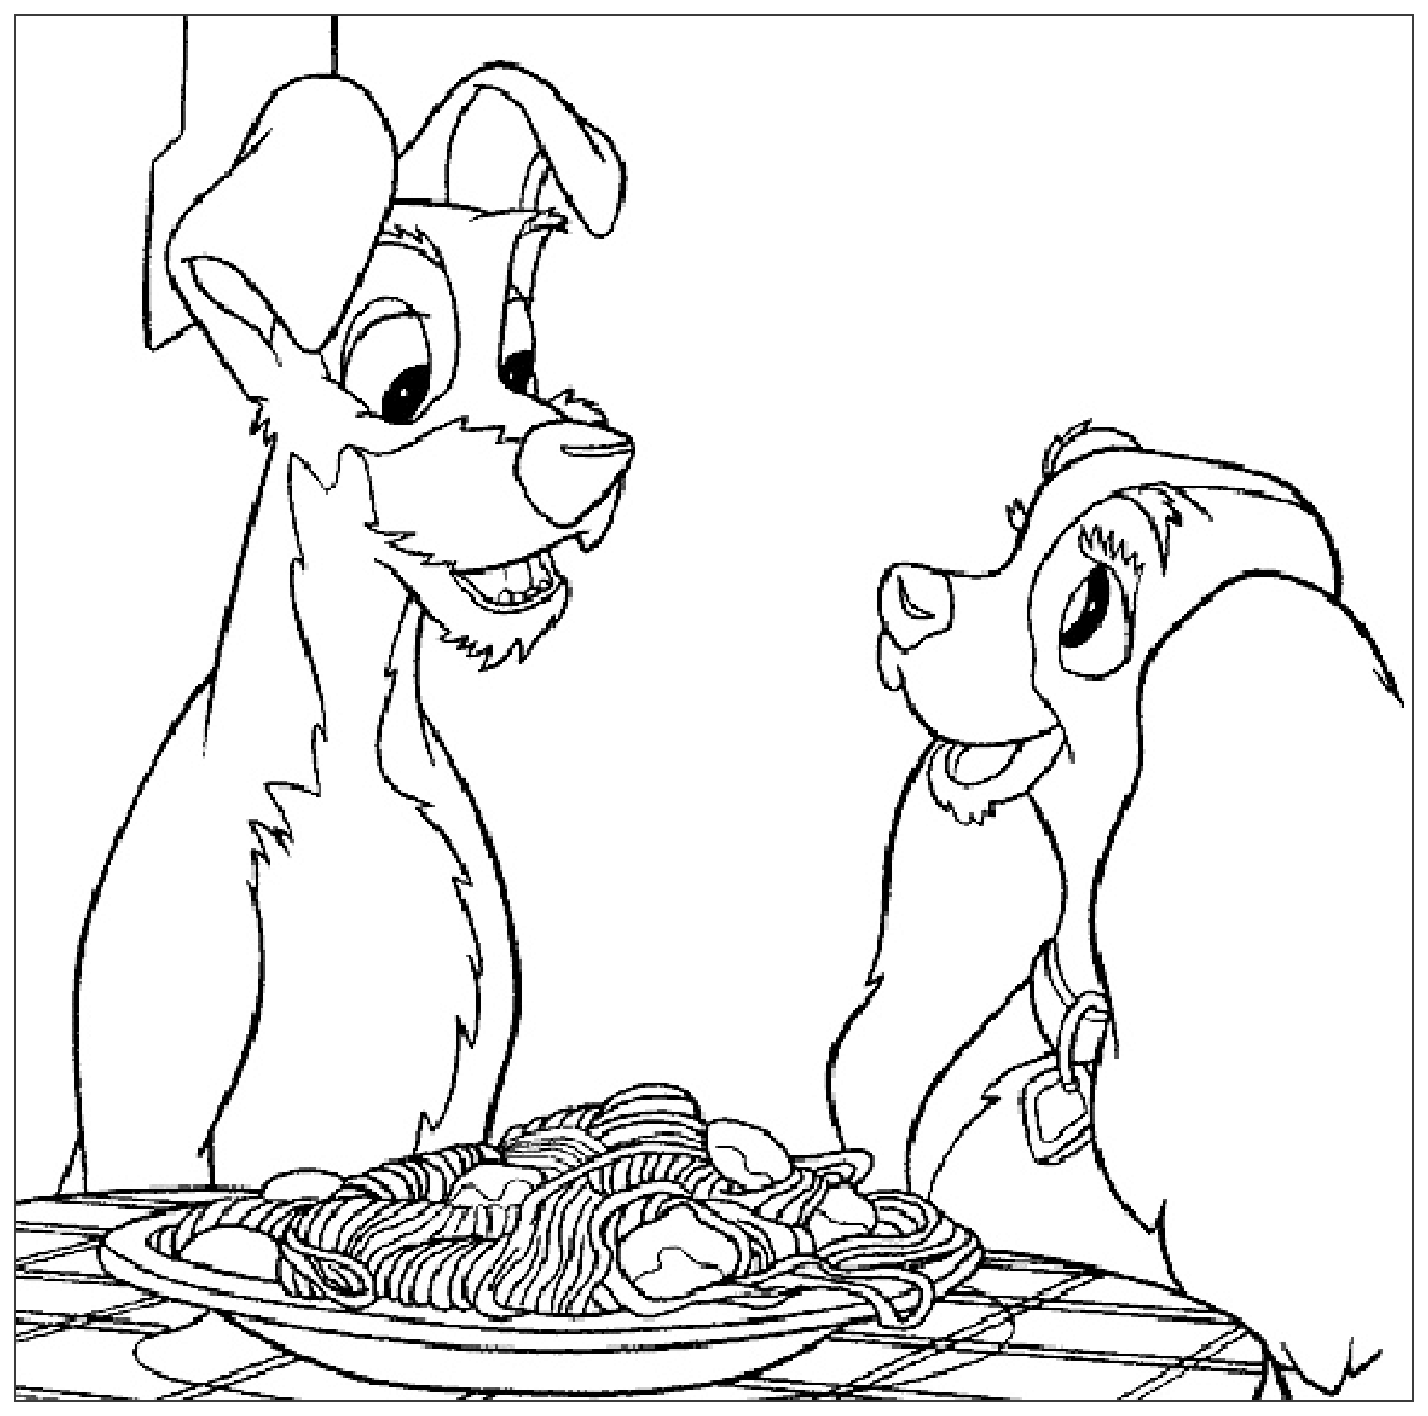 lady and the tramp coloring page lady and the tramp coloring pages picgifscom and coloring tramp page lady the 